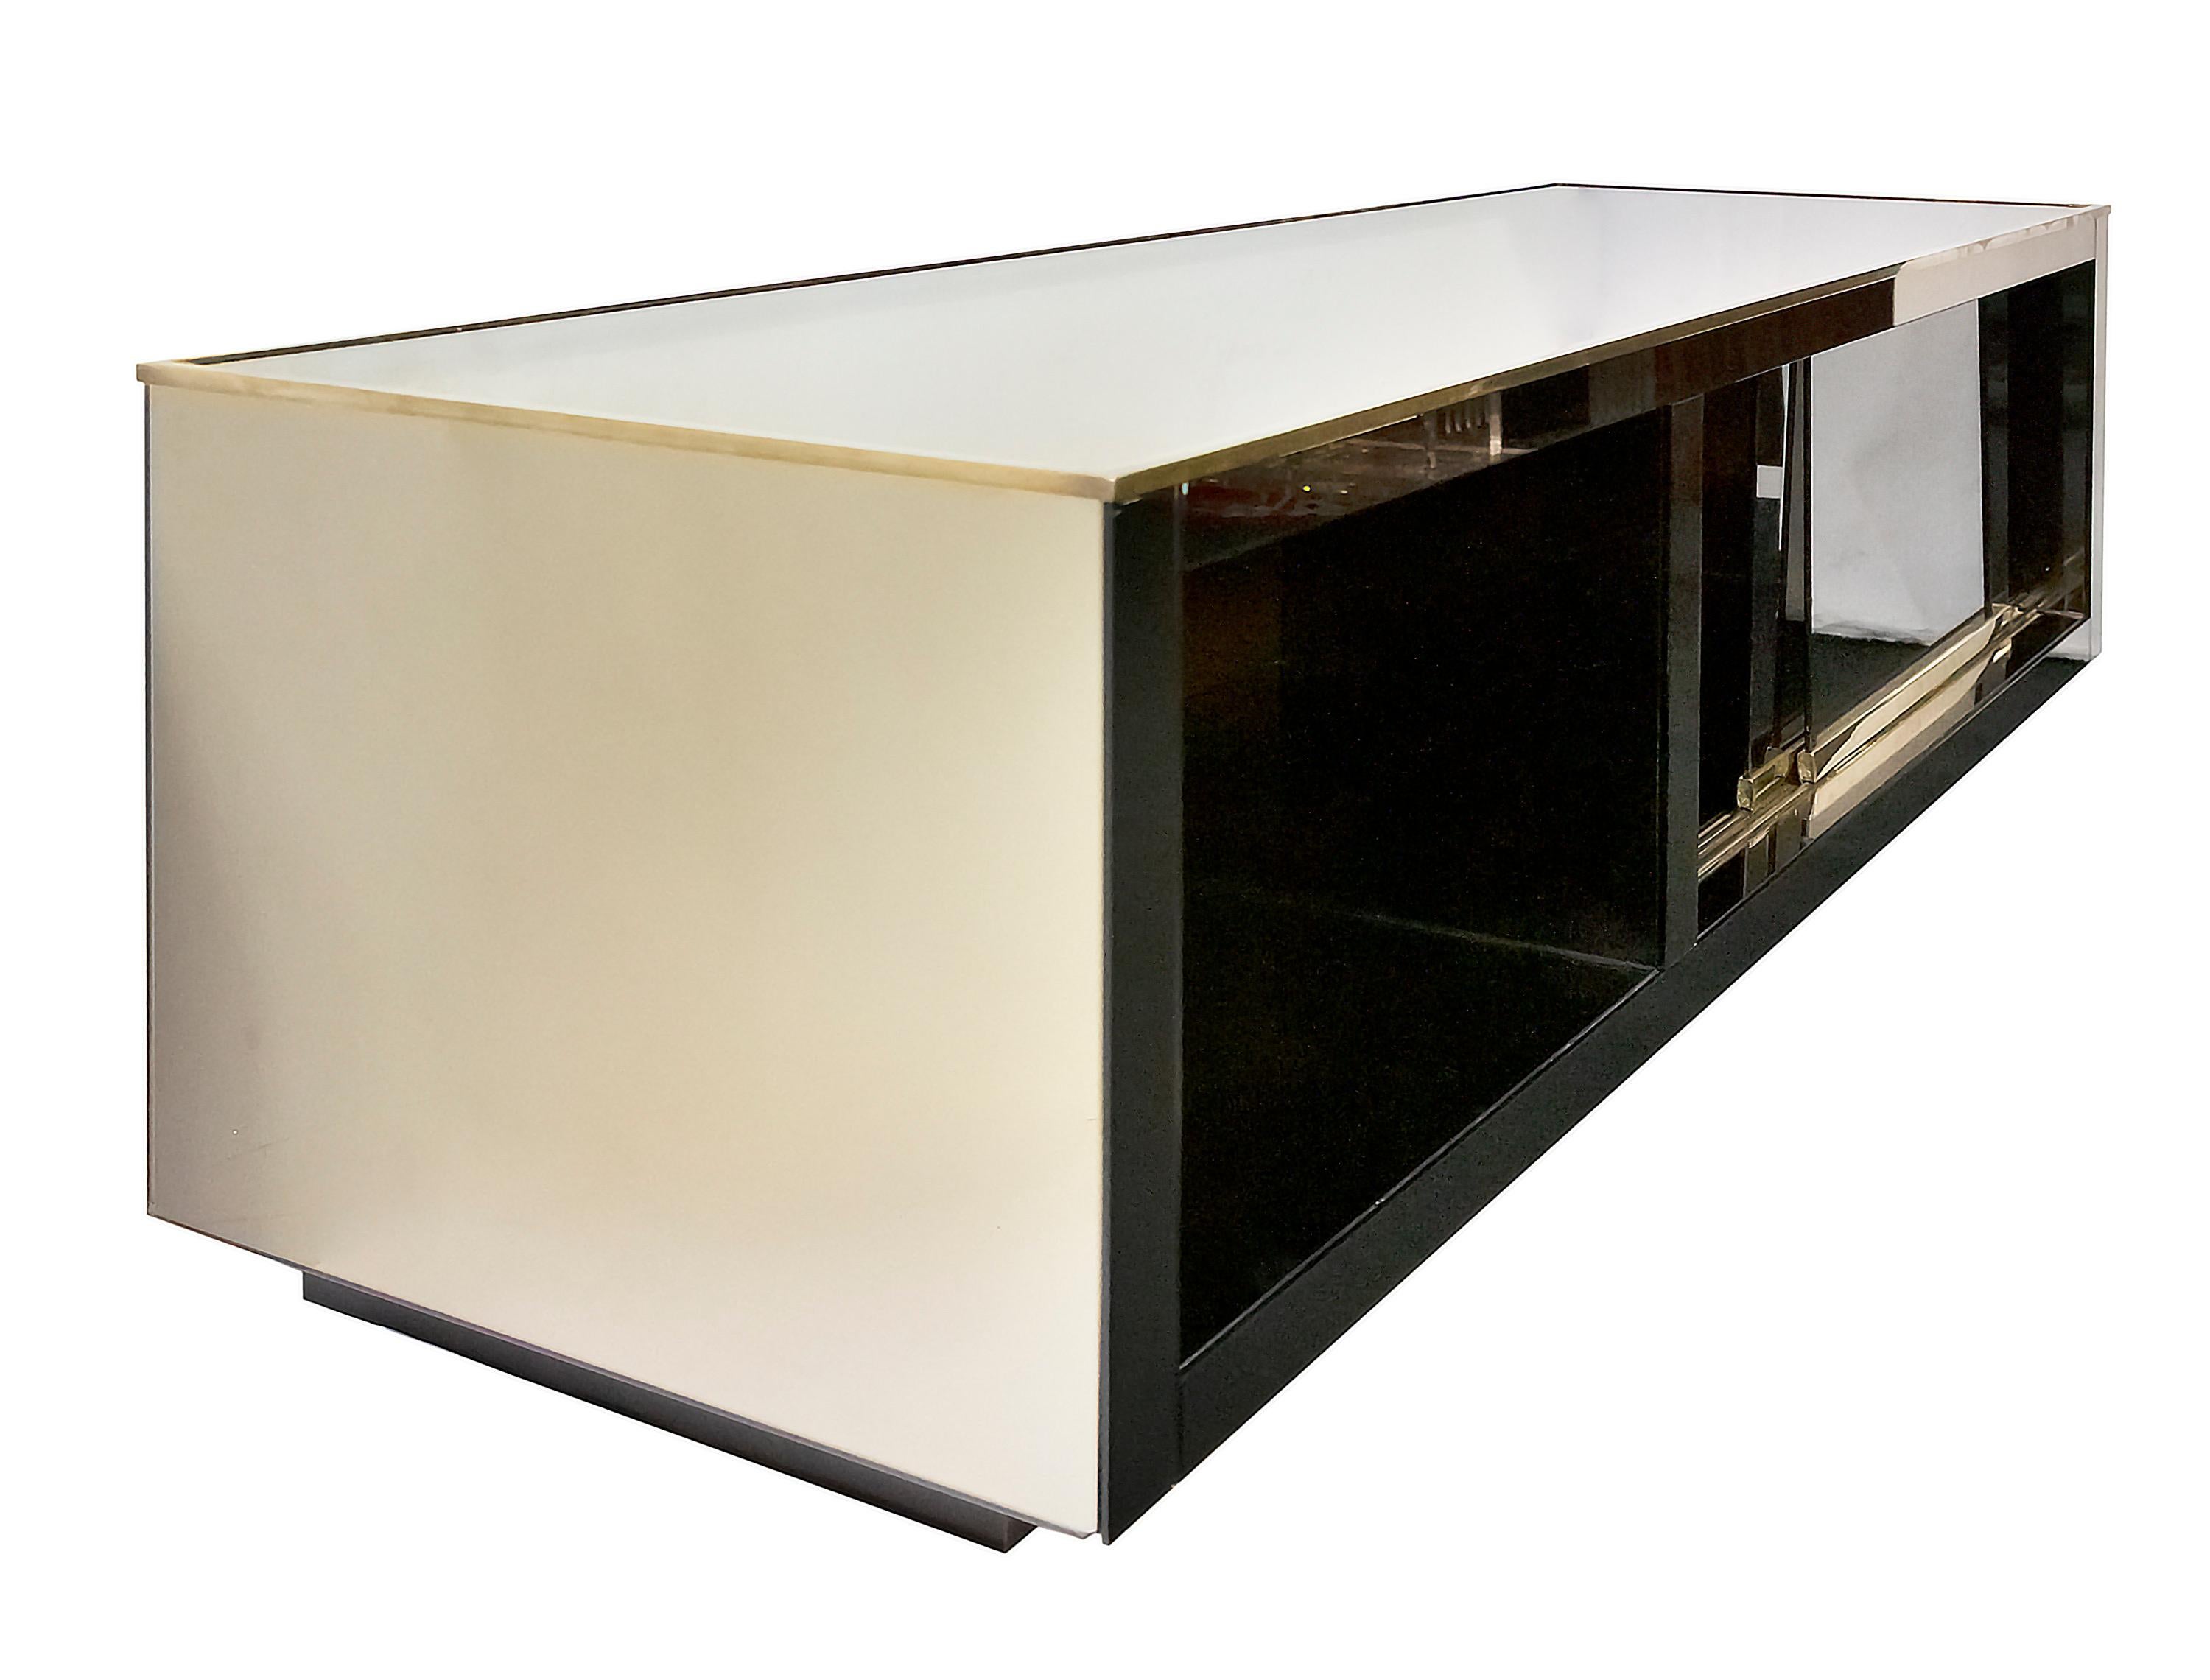 Italian mid-century mirrored sideboard or console stand for television in the style of Romeo Rega. This furniture is all decorated with mirror, open shelve storage and closed part with two sliding doors with brass decor elements.
Overall very